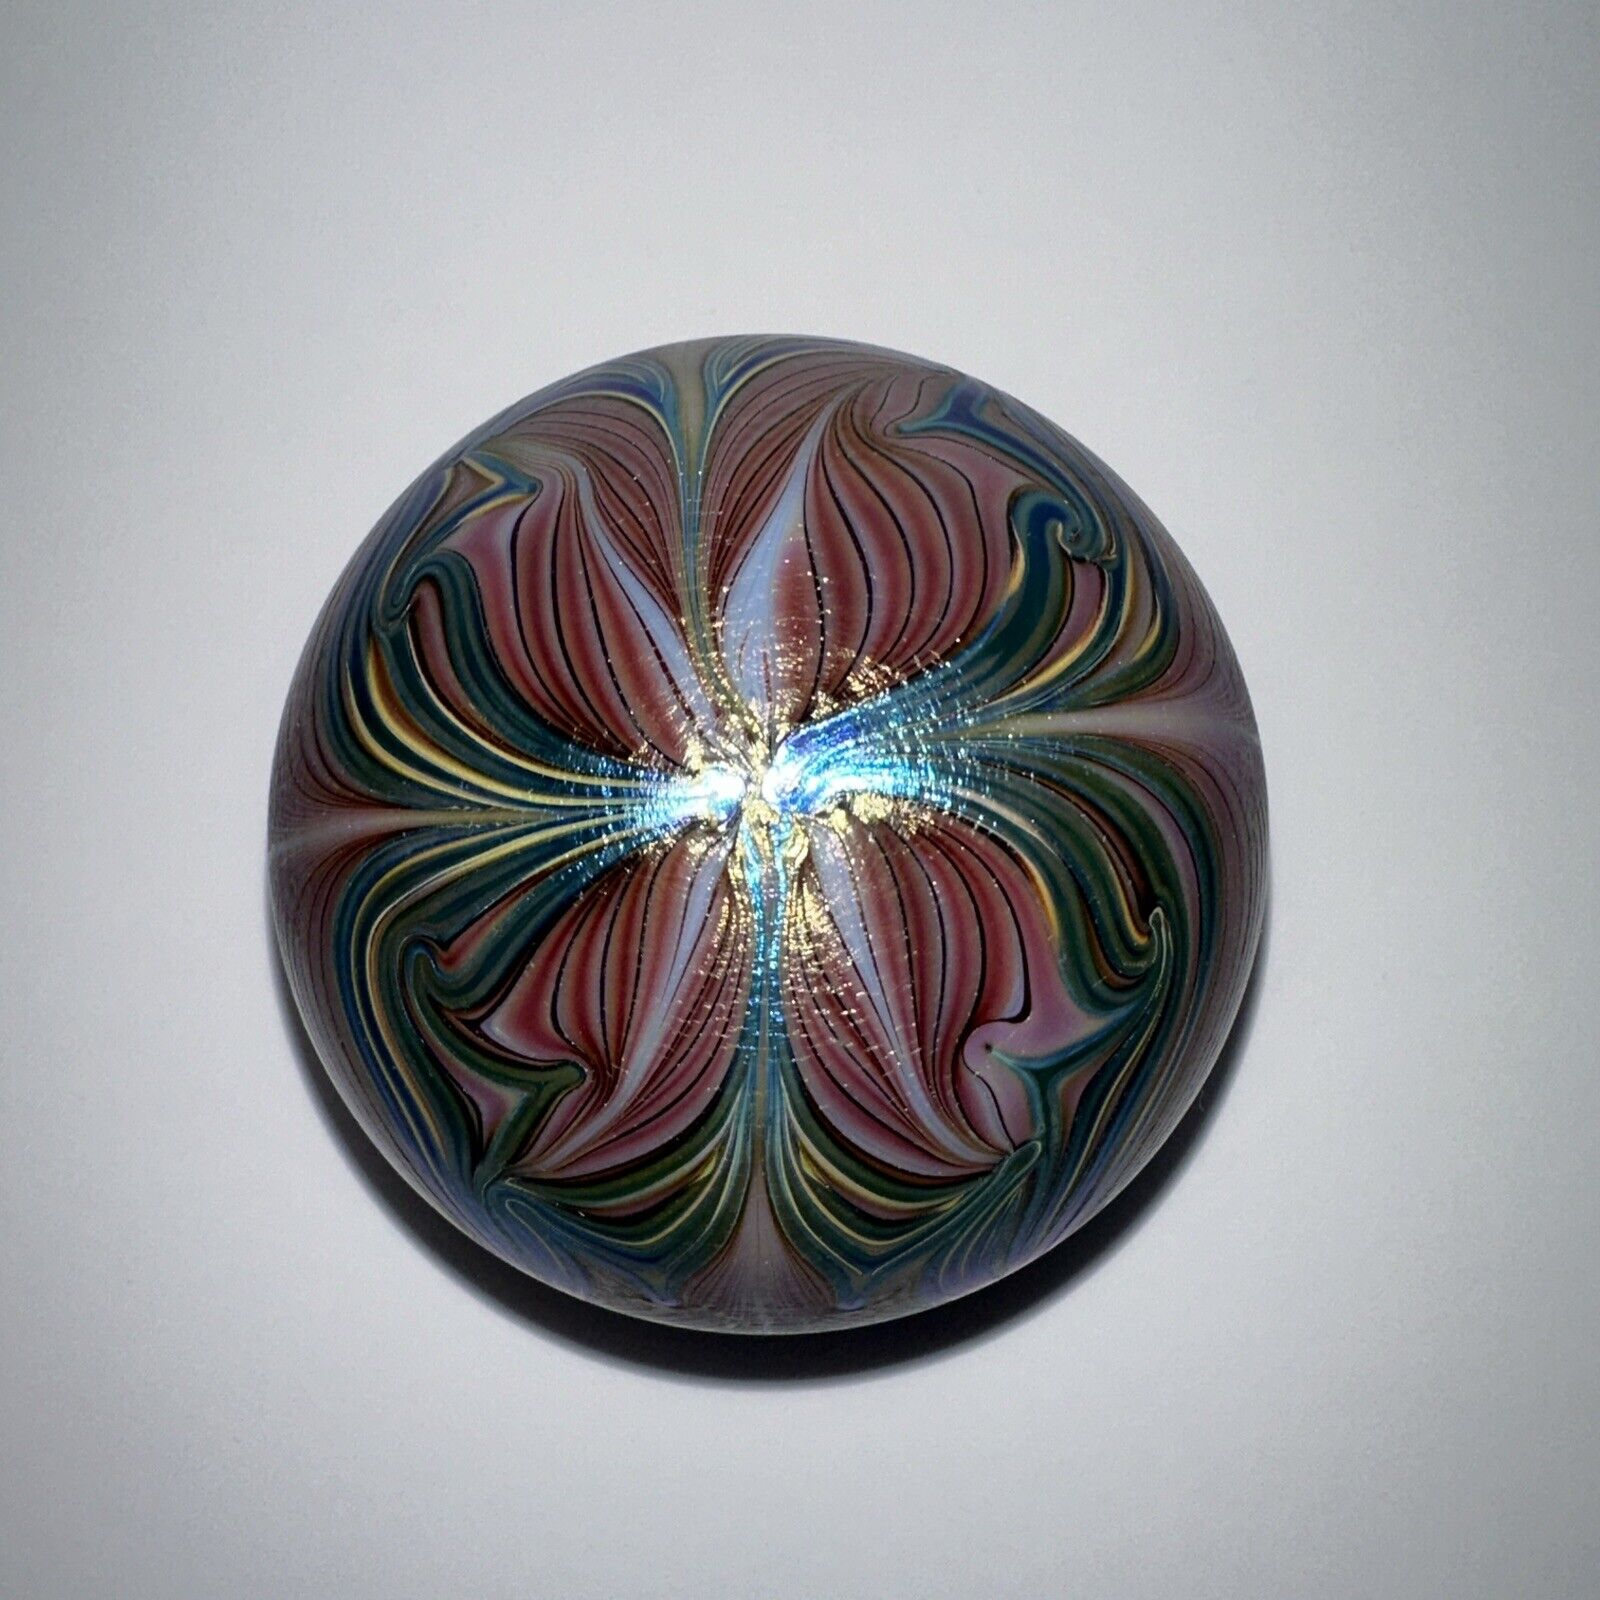 Stunning Zephyr Studio Art Signed Glass Pulled Feather Paperweight